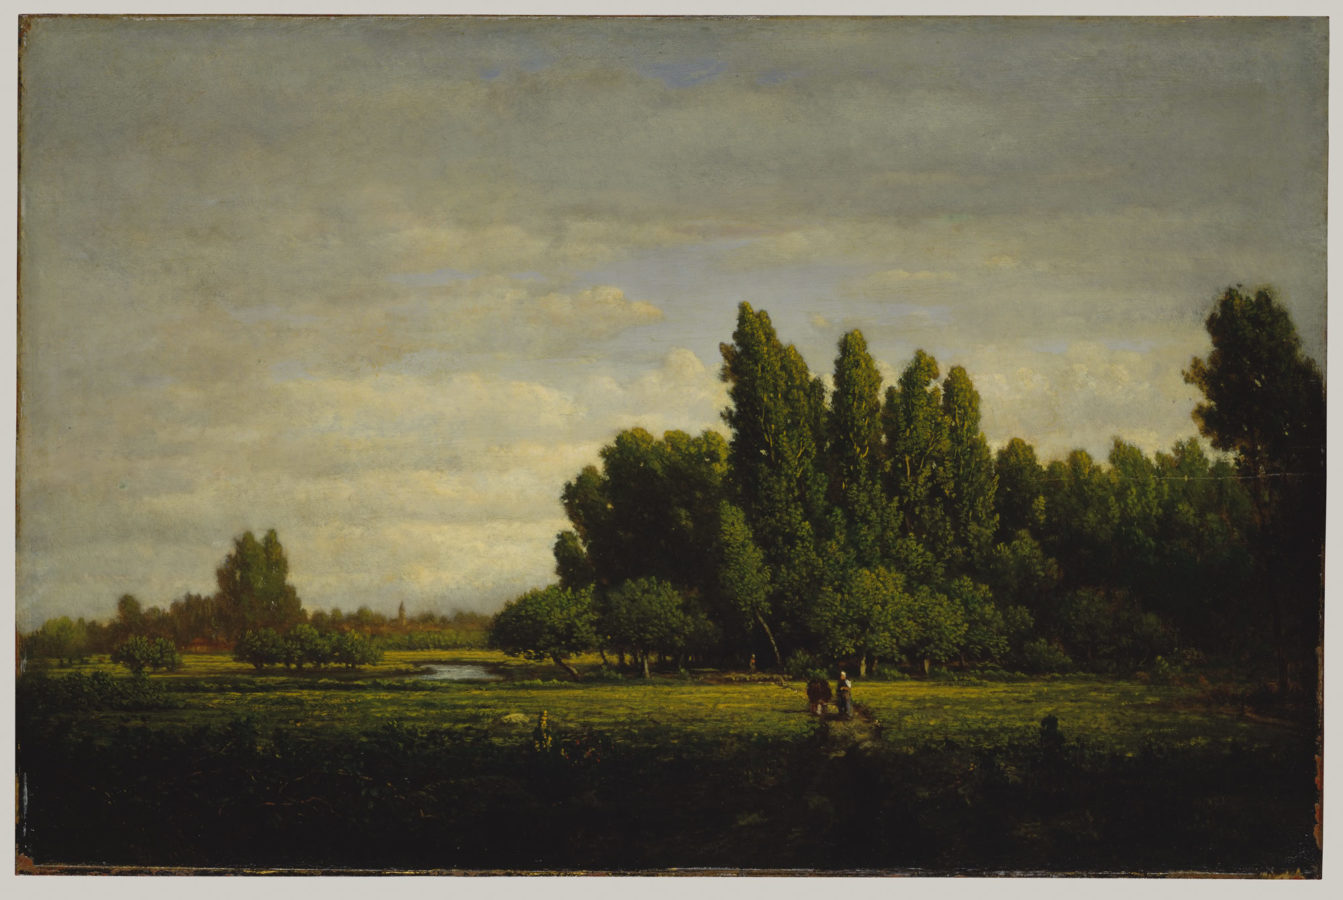 Théodore Rousseau, A Meadow Bordered by Trees, ca.1845, The Metropolitan Museum of Art, New York, NY, USA. Summer Destinations